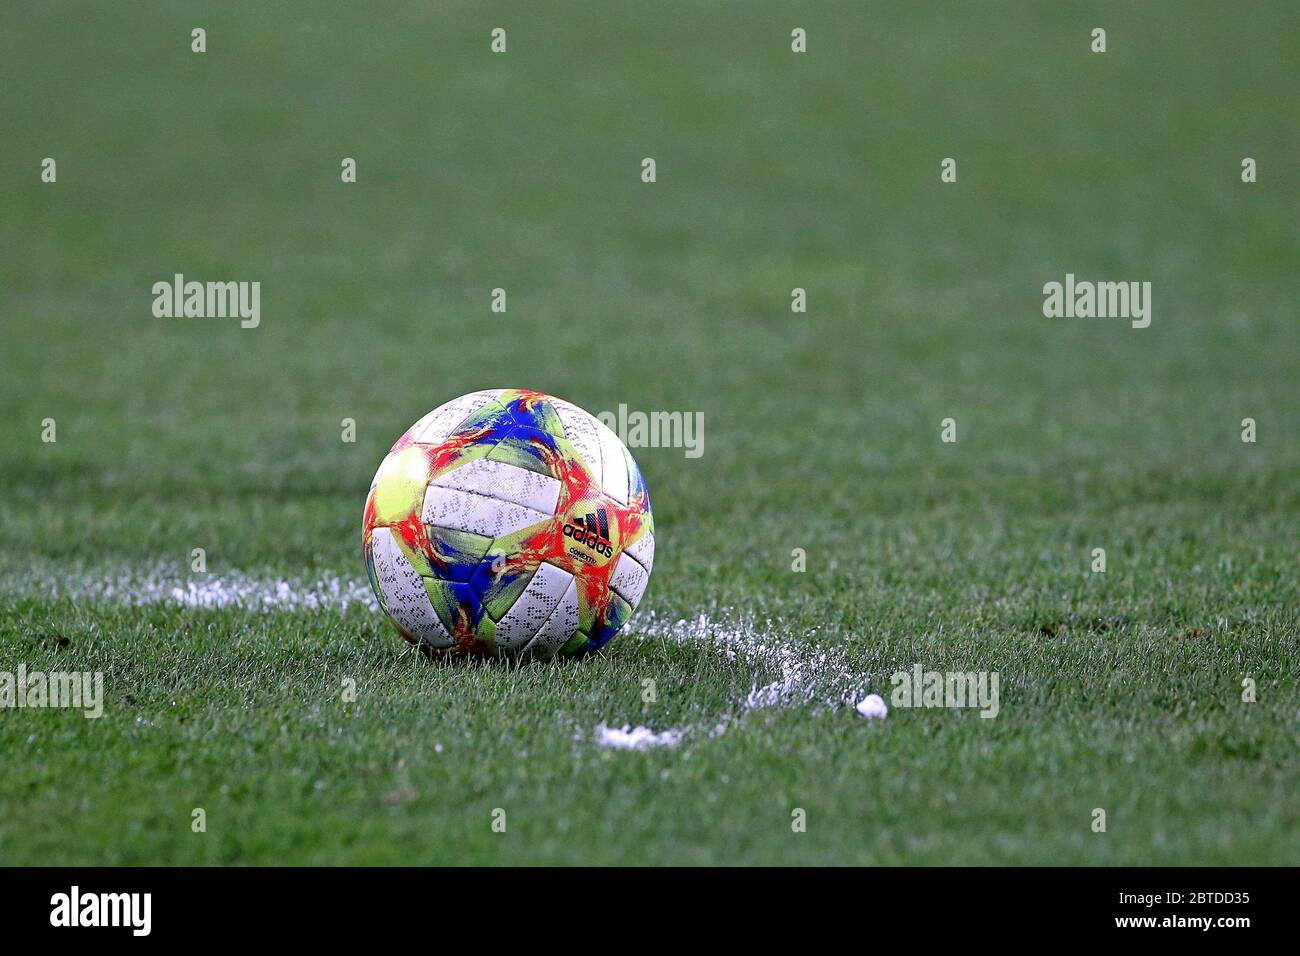 Spray For Free Kick High Stock Photography and Images - Alamy